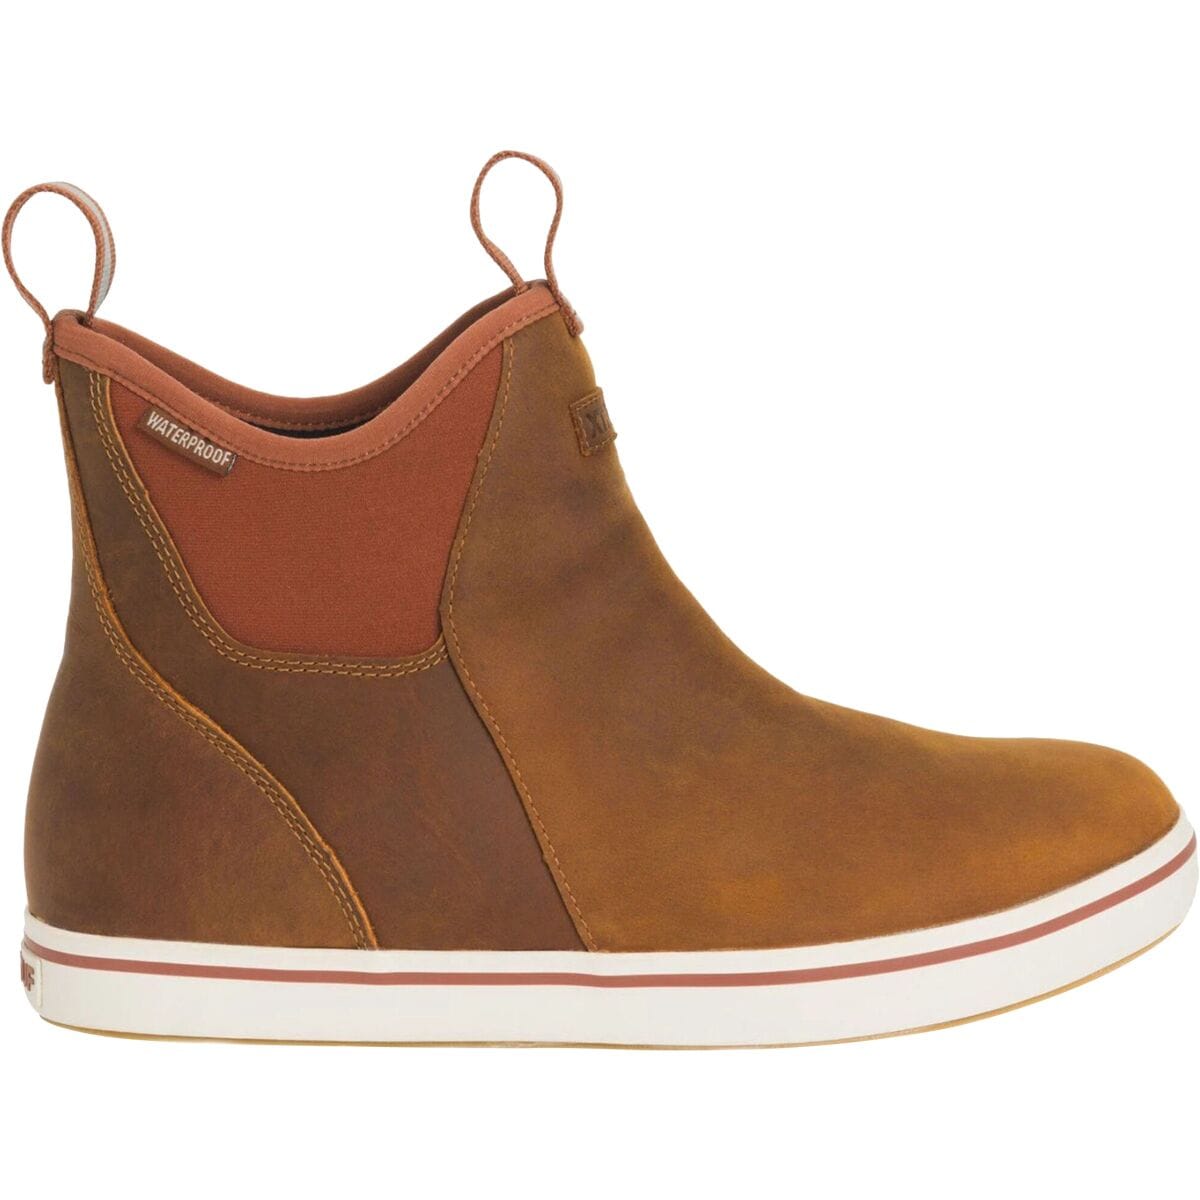 Ankle 6in Leather Deck Boot - Men